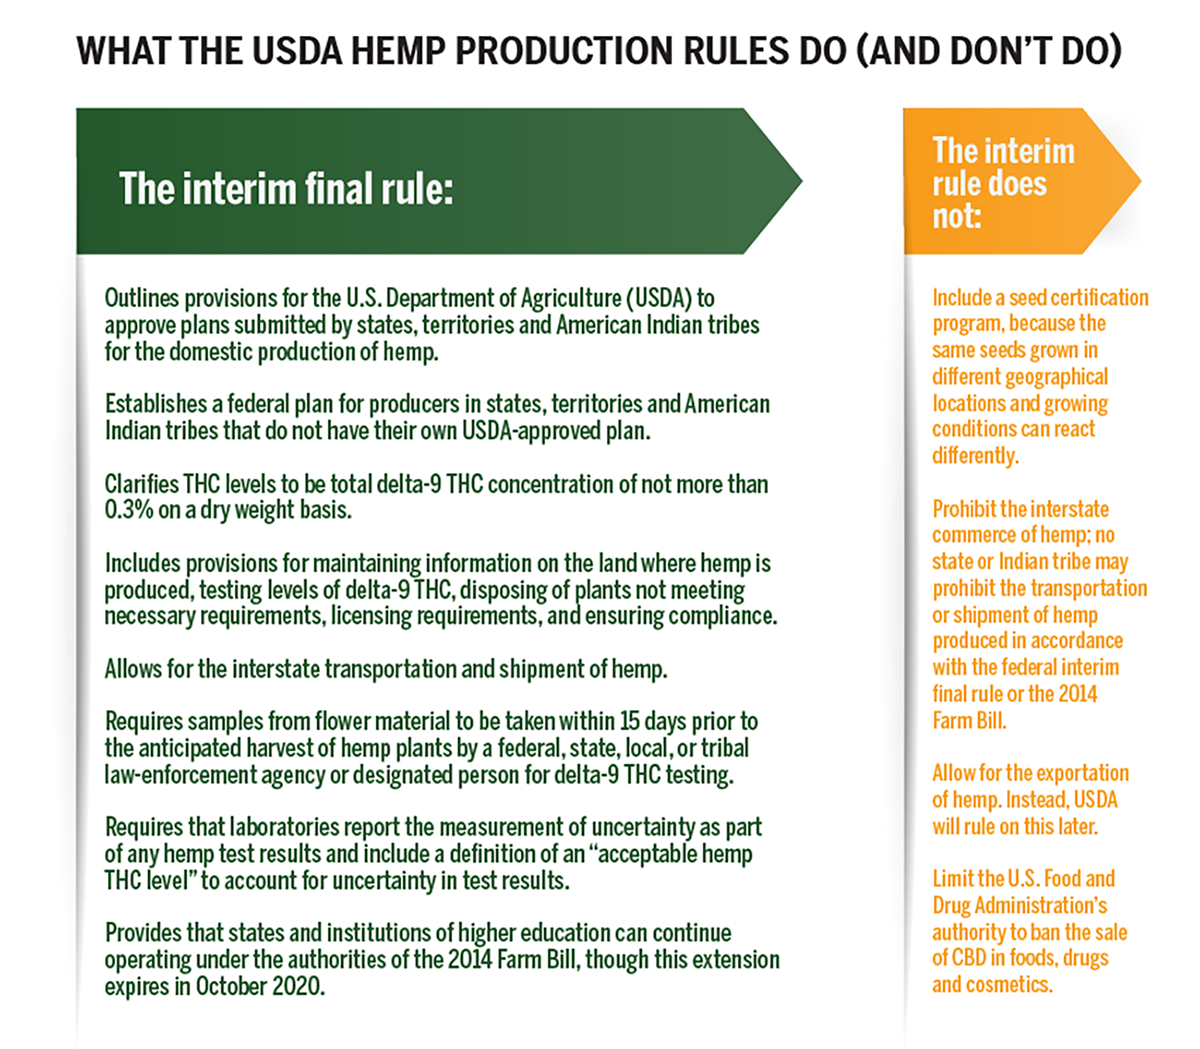 A deeper dive into USDA’s hemp production rules